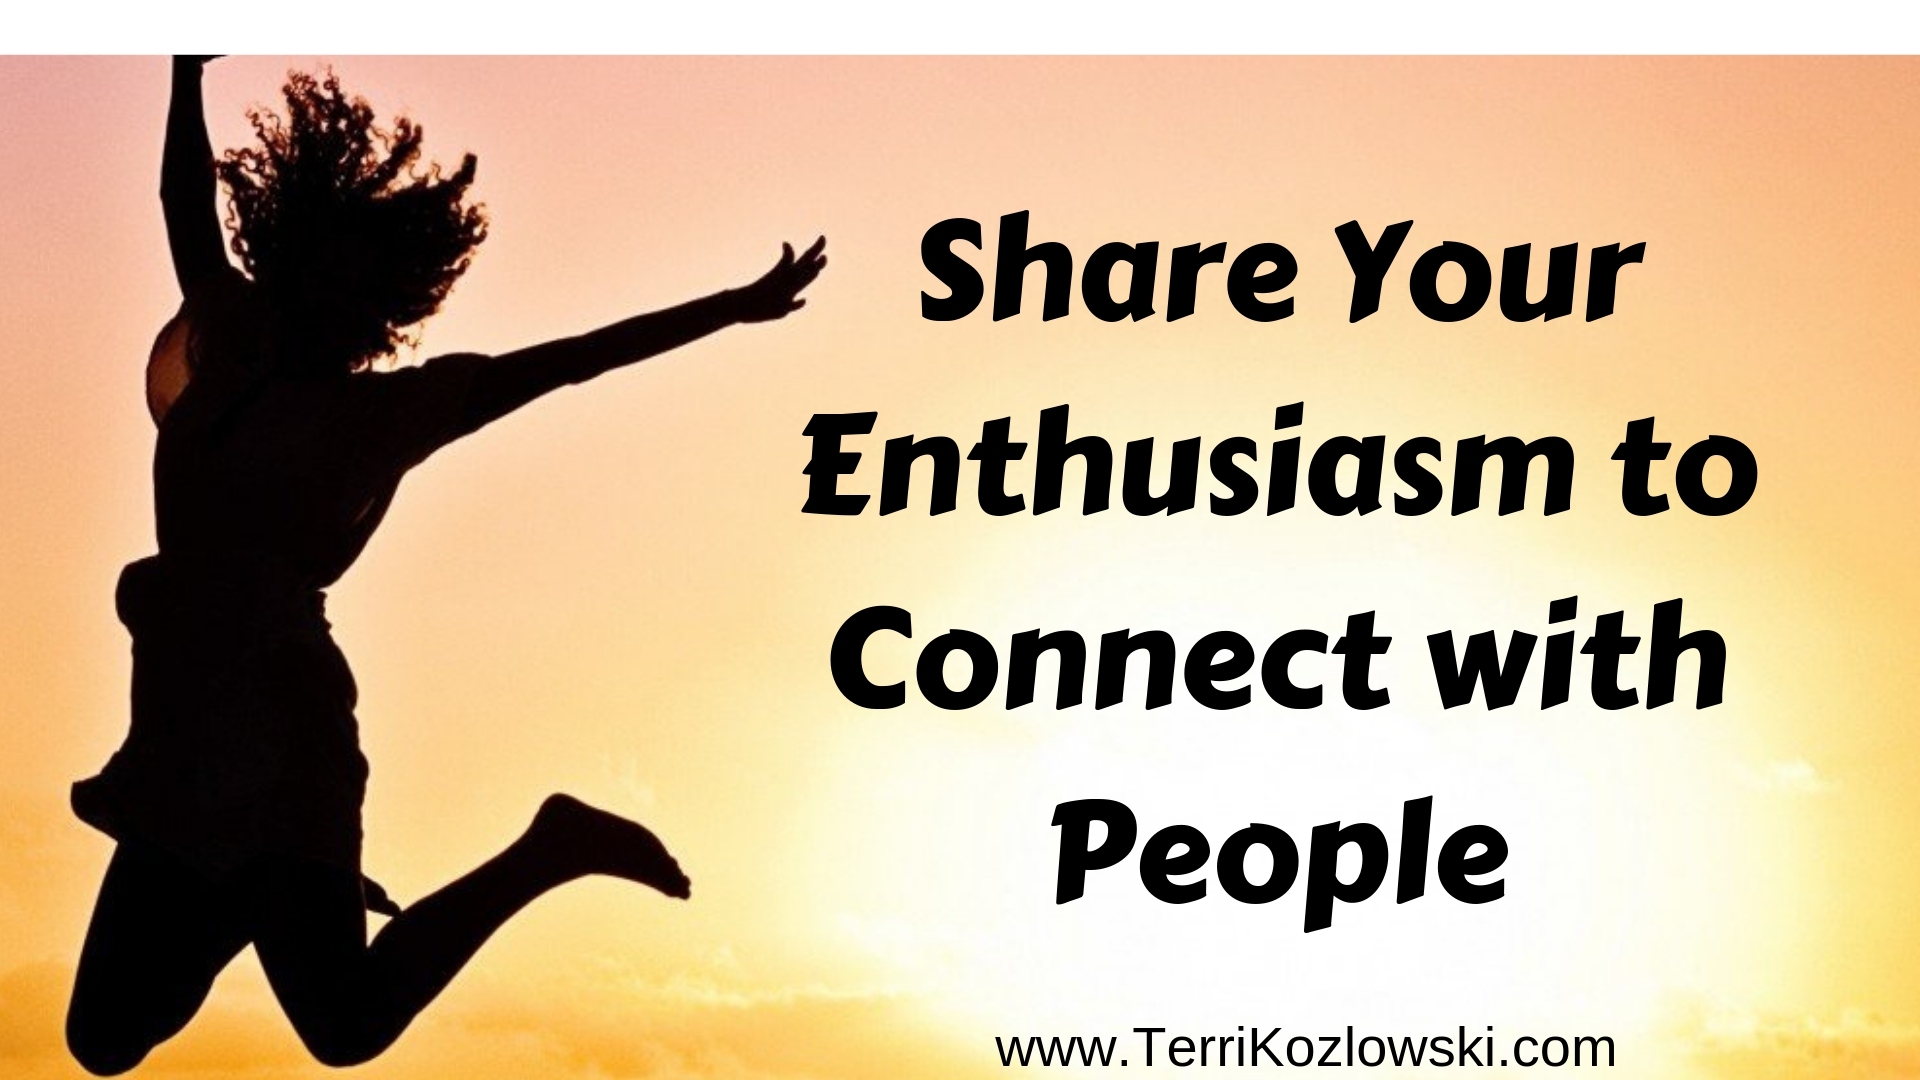 It is said that enthusiasm is contagious.